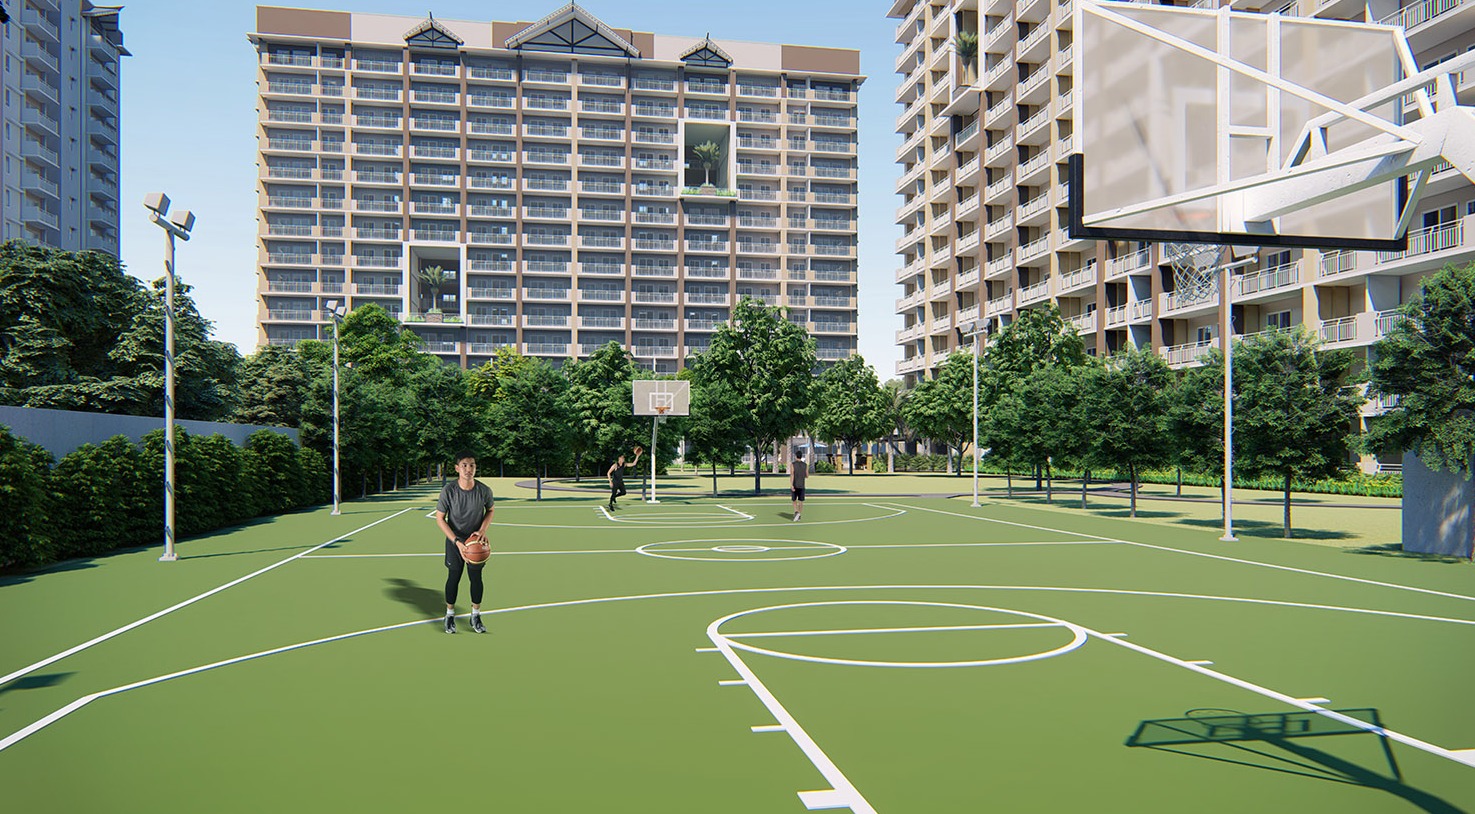 Artists illustration of the basketball court.